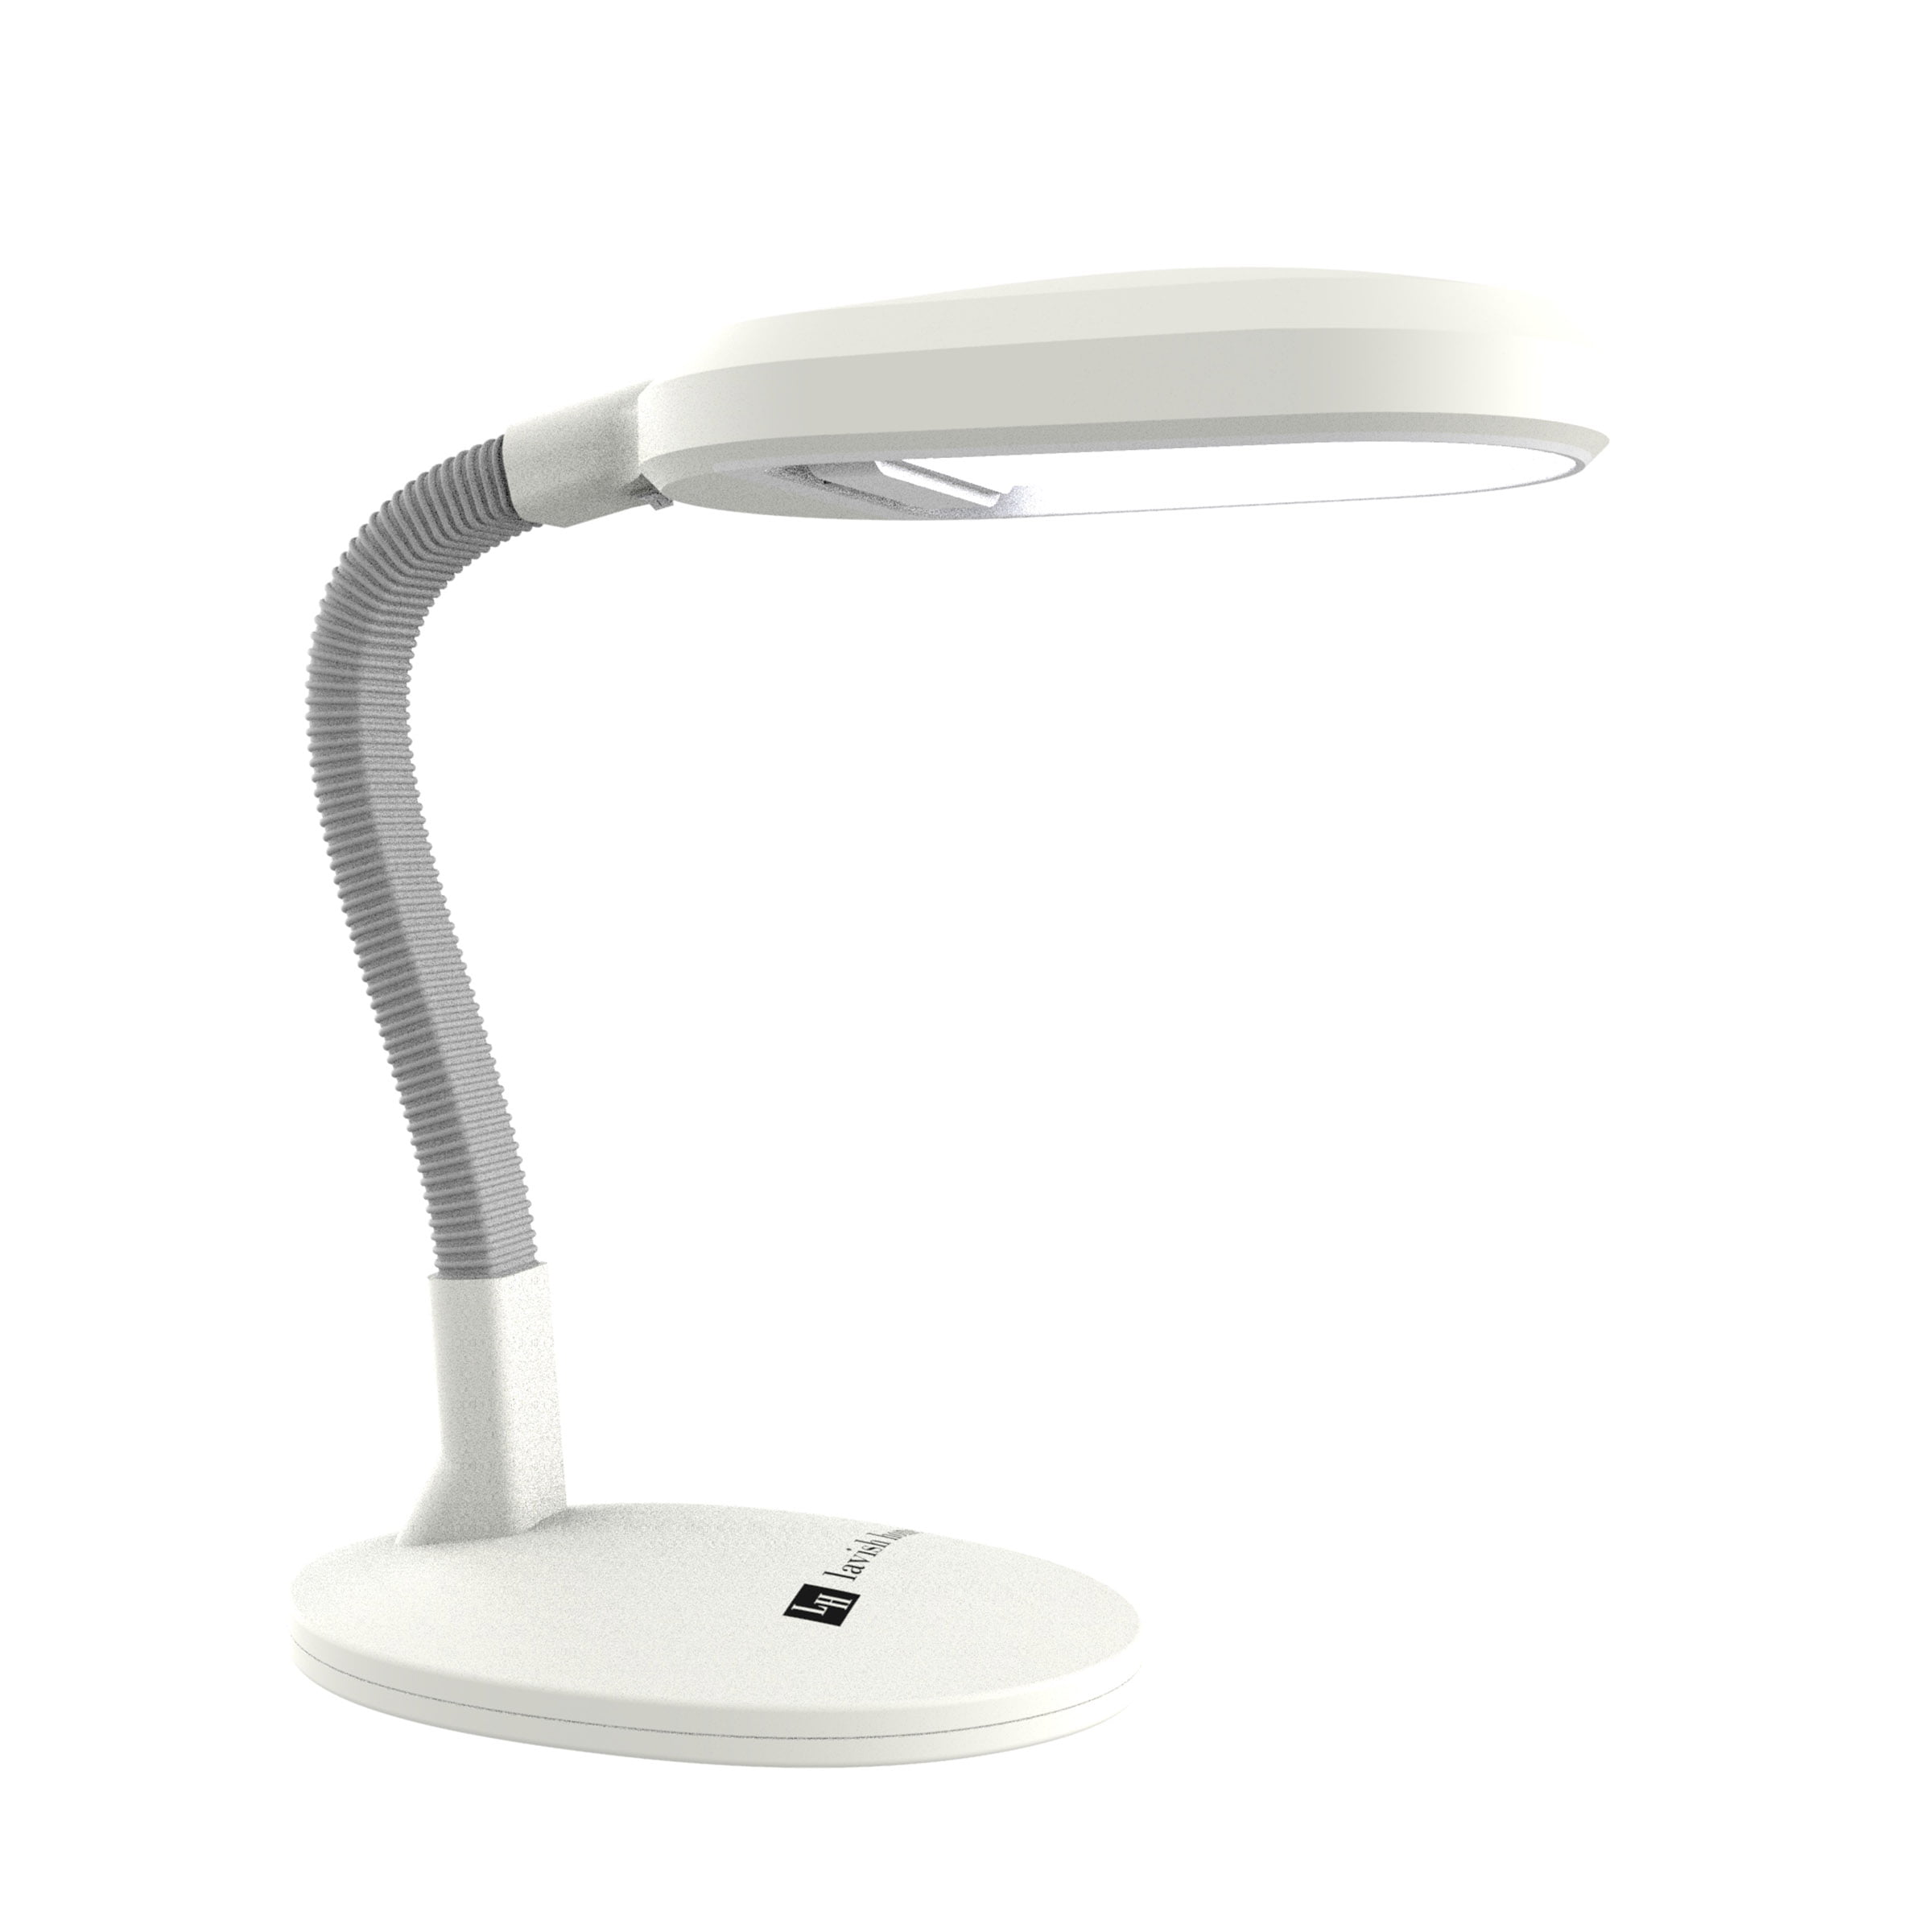 Natural Therapy Sunlight Desk Lamp, Great For Reading and Crafting,  Adjustable Gooseneck, Home and Office Lamp by Lavish Home, 7D x 9W x 22H  , Silver 